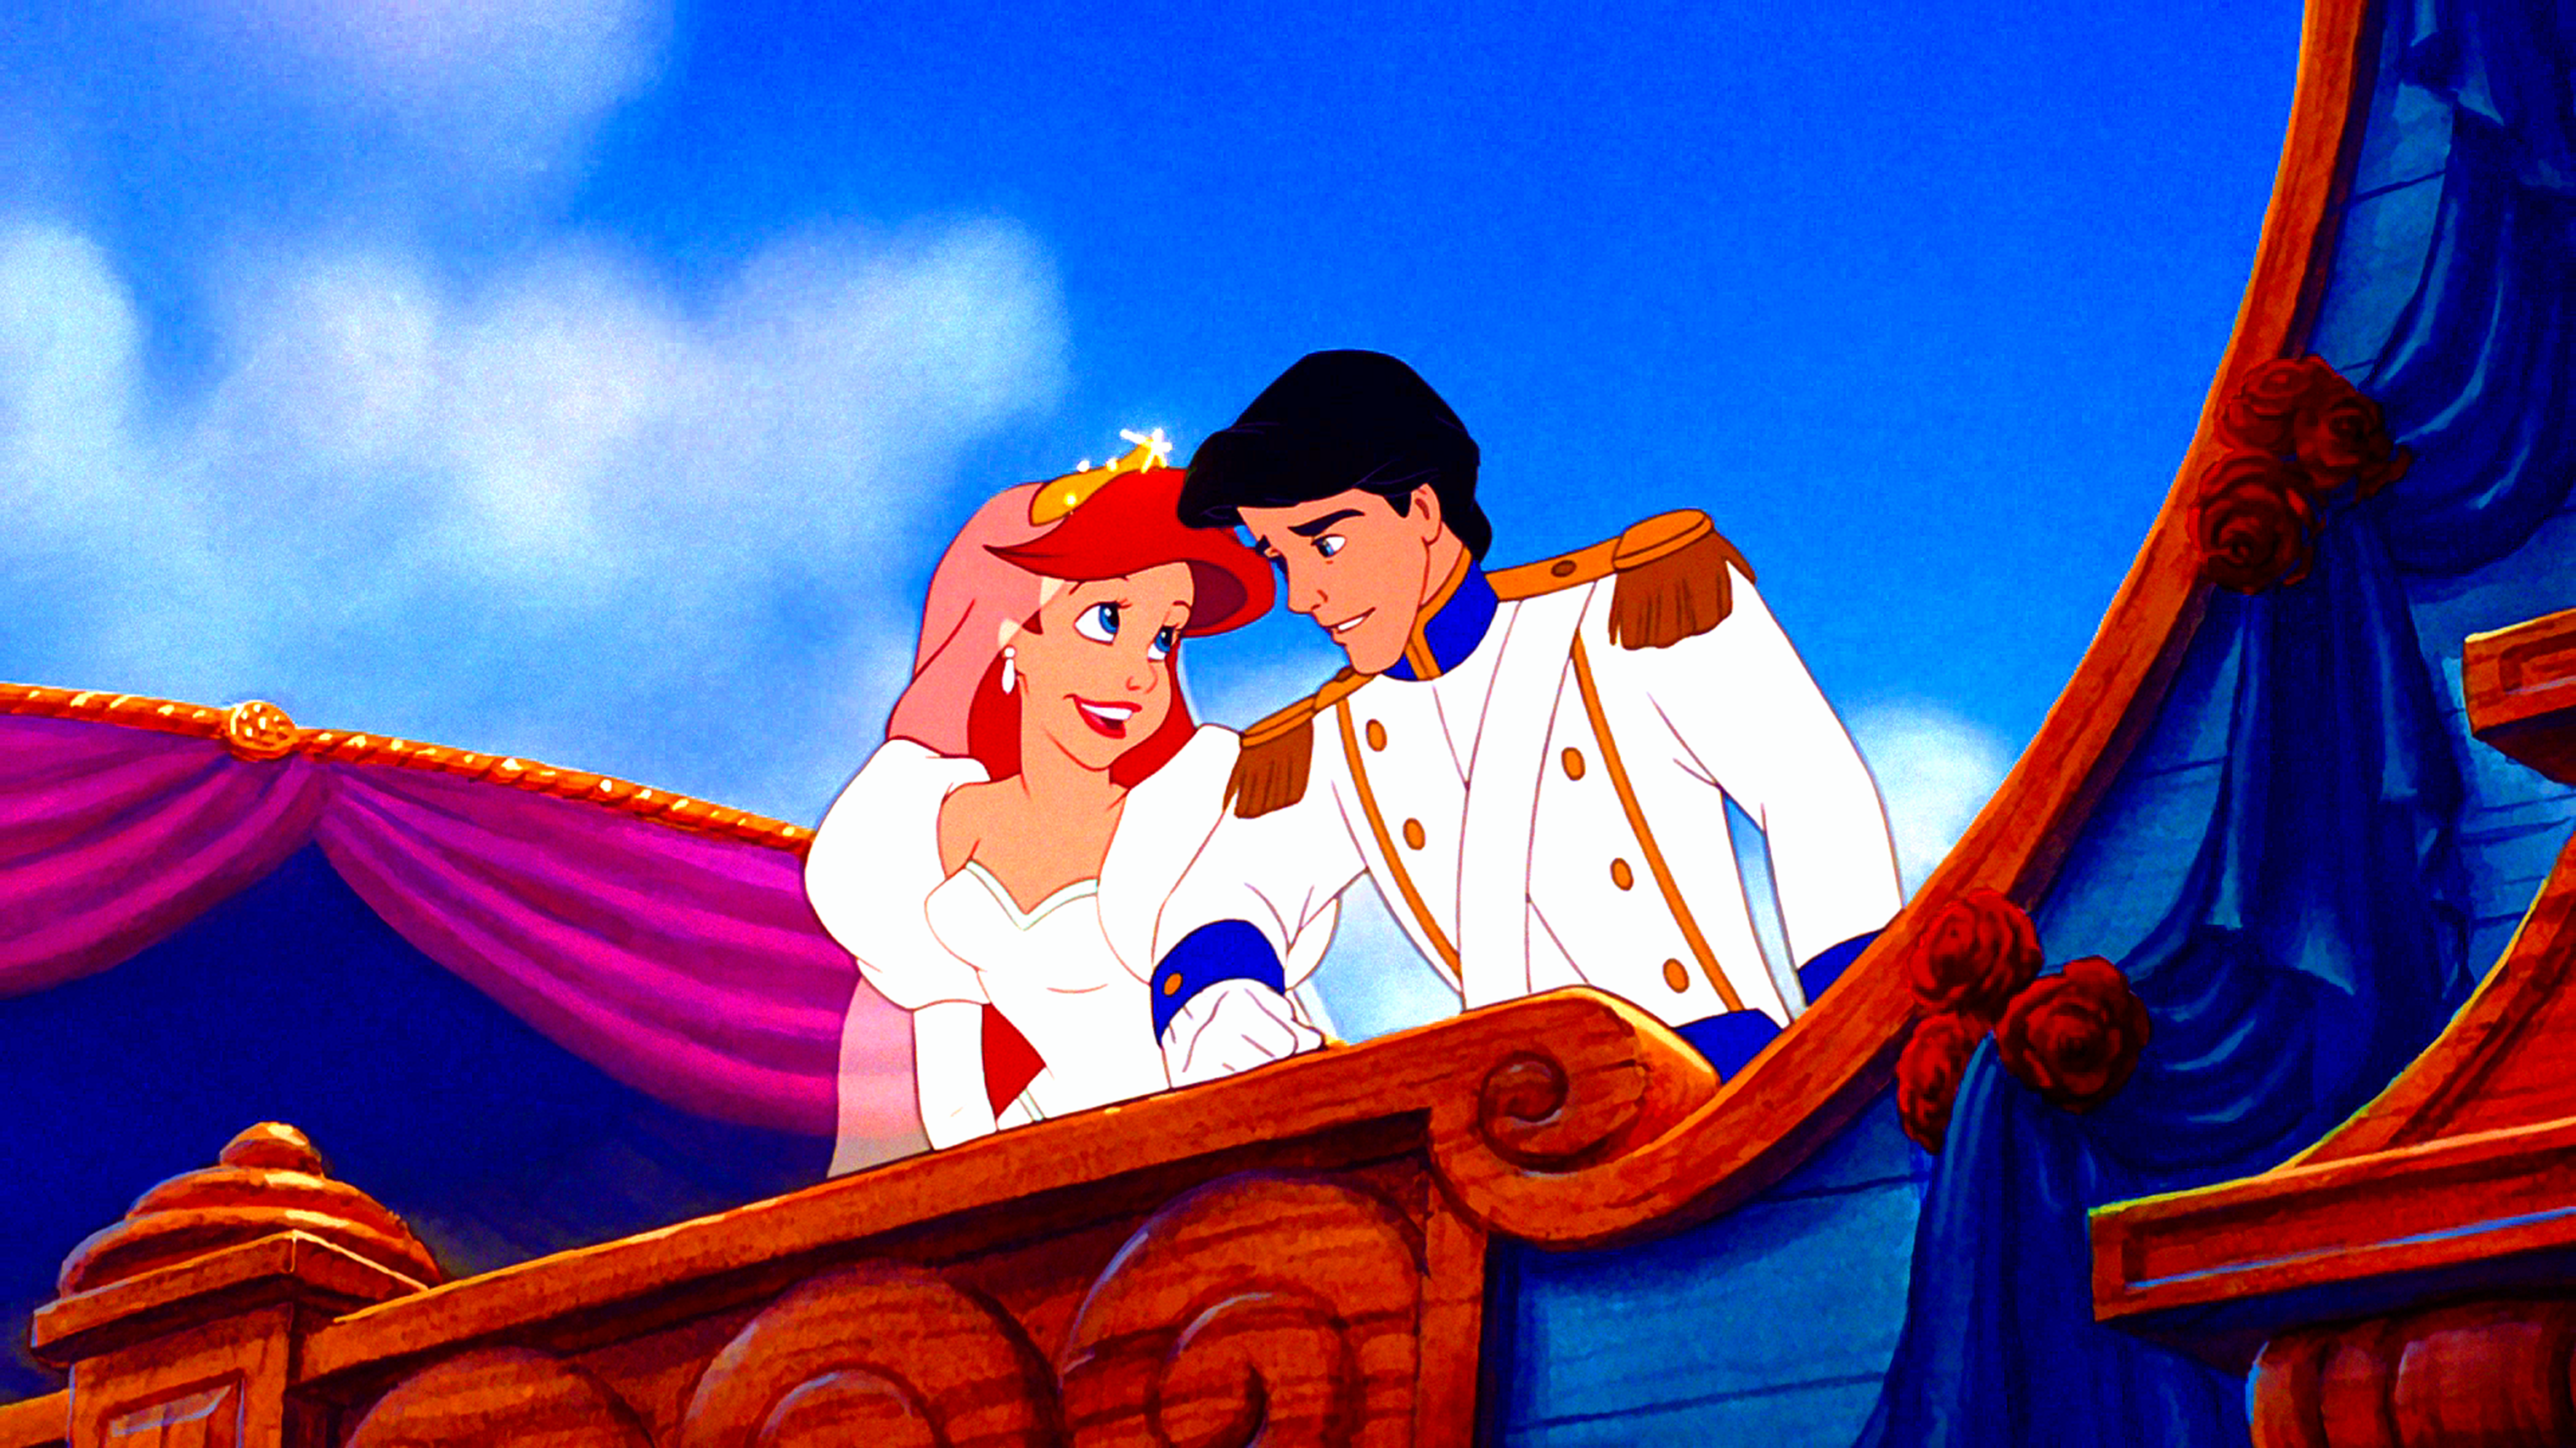 Walt Disney Screencapture of Princess Ariel and Prince Eric from "The ...